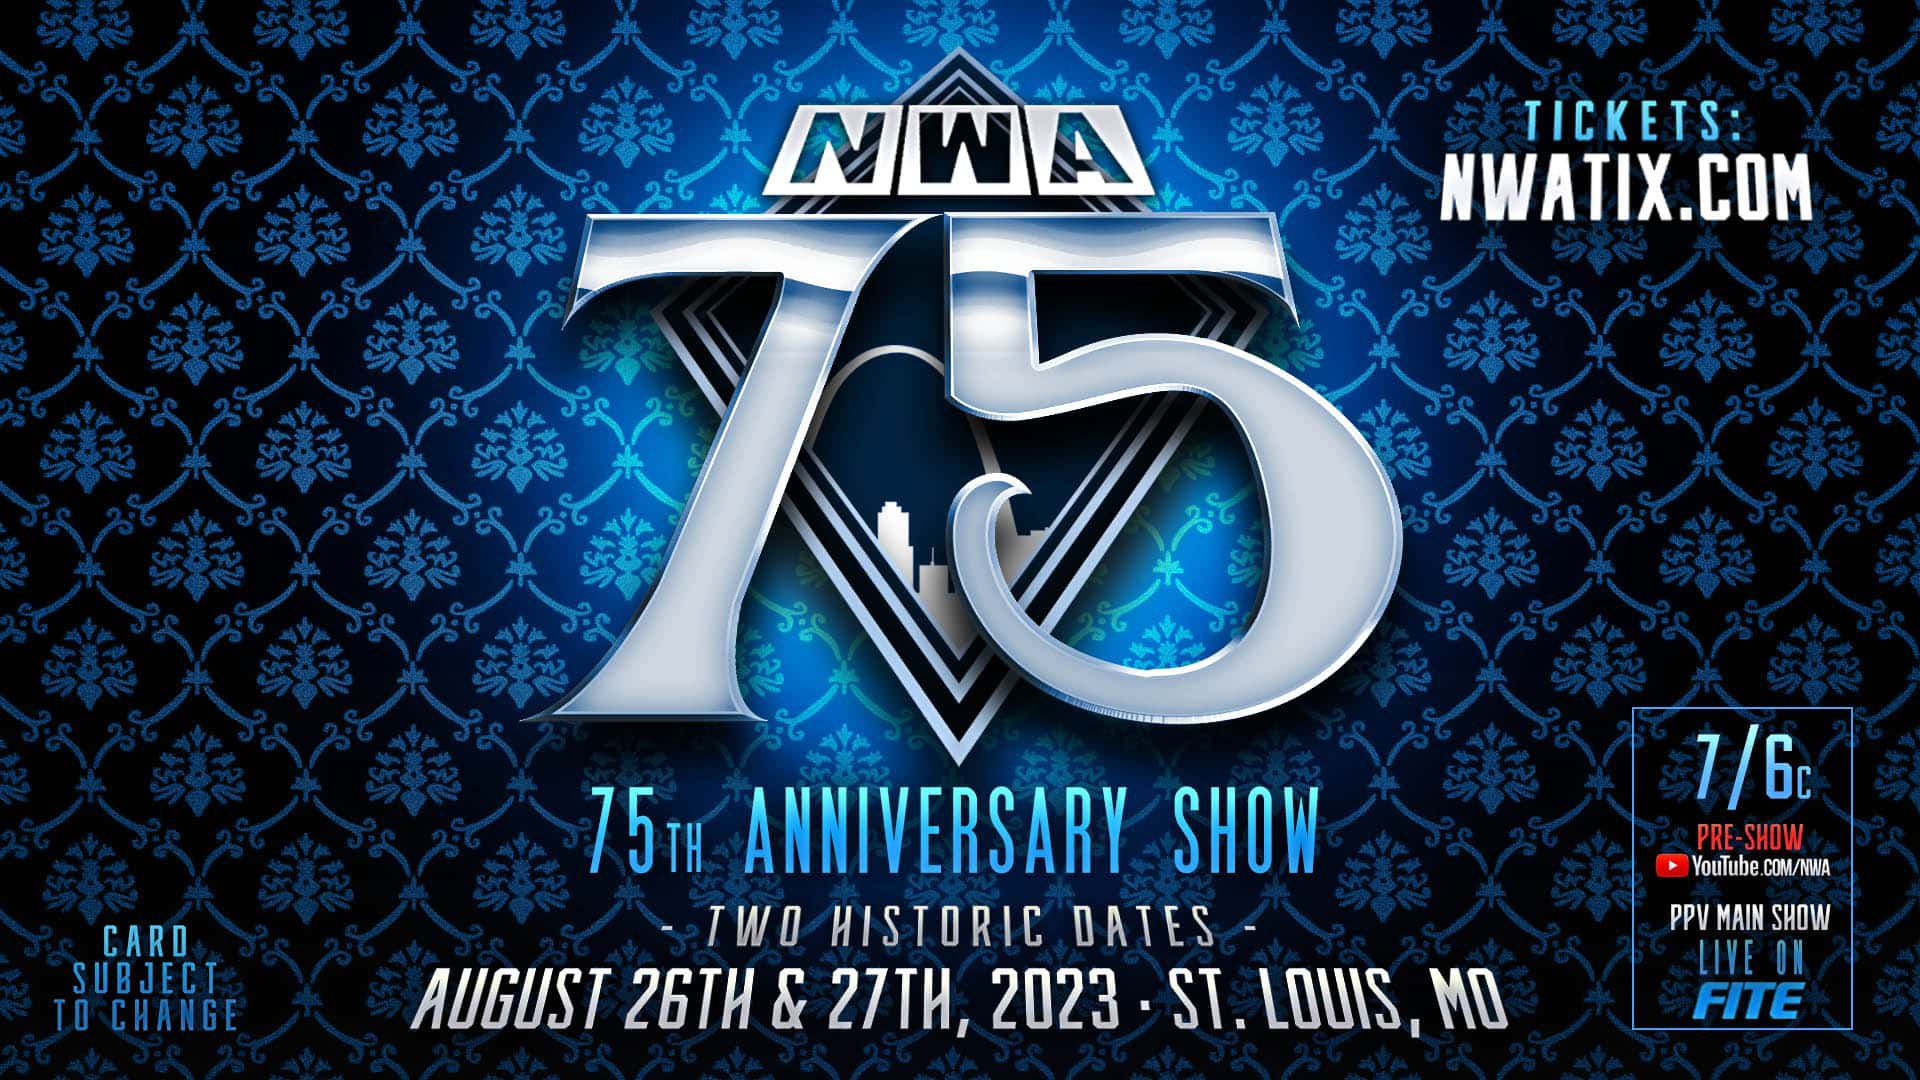 NWA returning to St. Louis for 75th-anniversary show